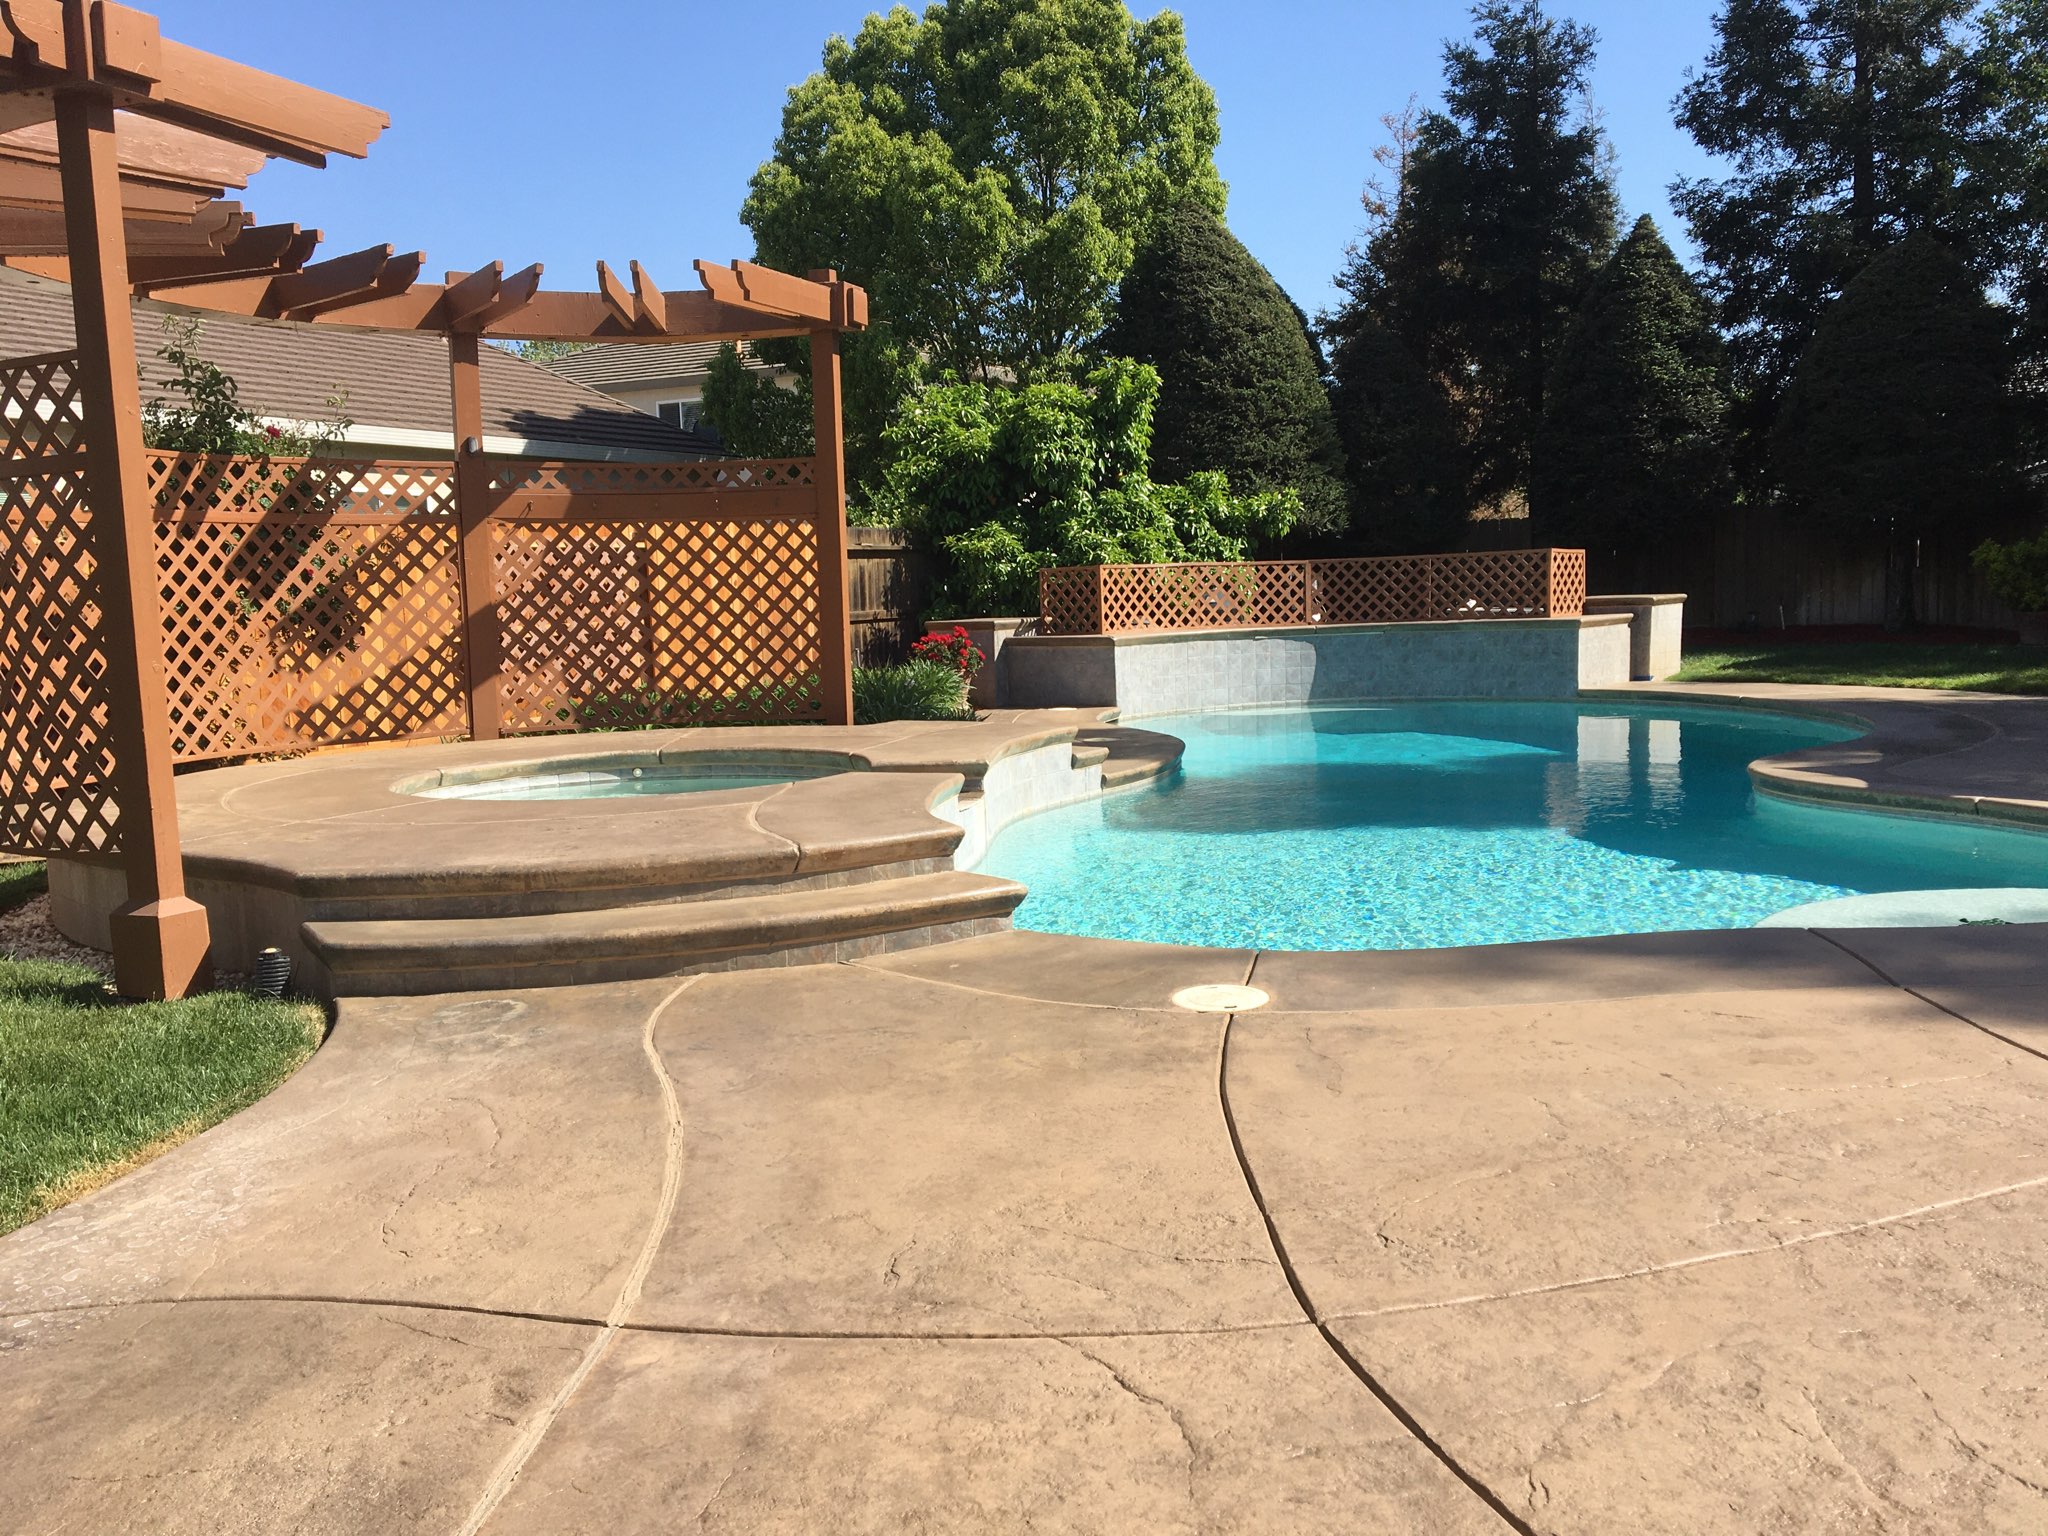 Khaki Stained Stained Concrete Pool Deck